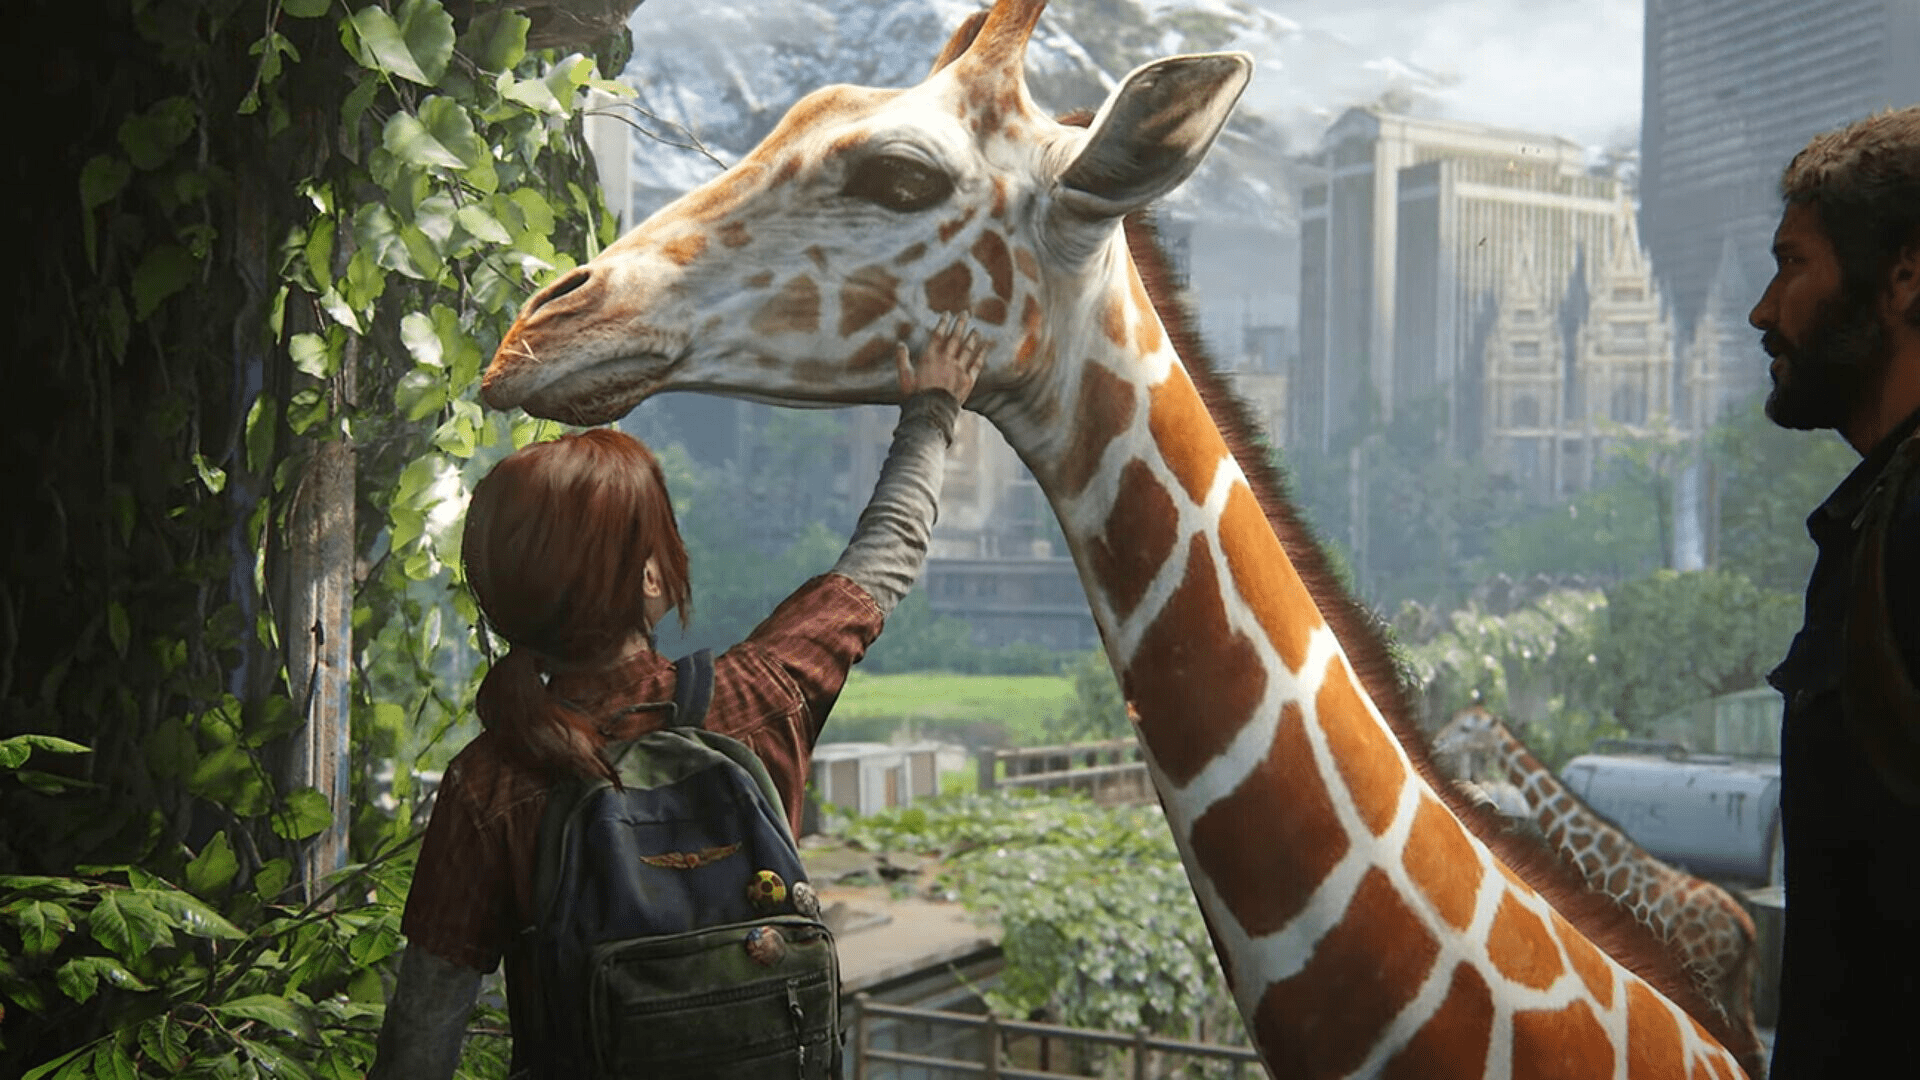 The Last Of Us Video Game - The Last Of Us TV Show Is A Sensation But What Happens In The Last Of Us Video Game?